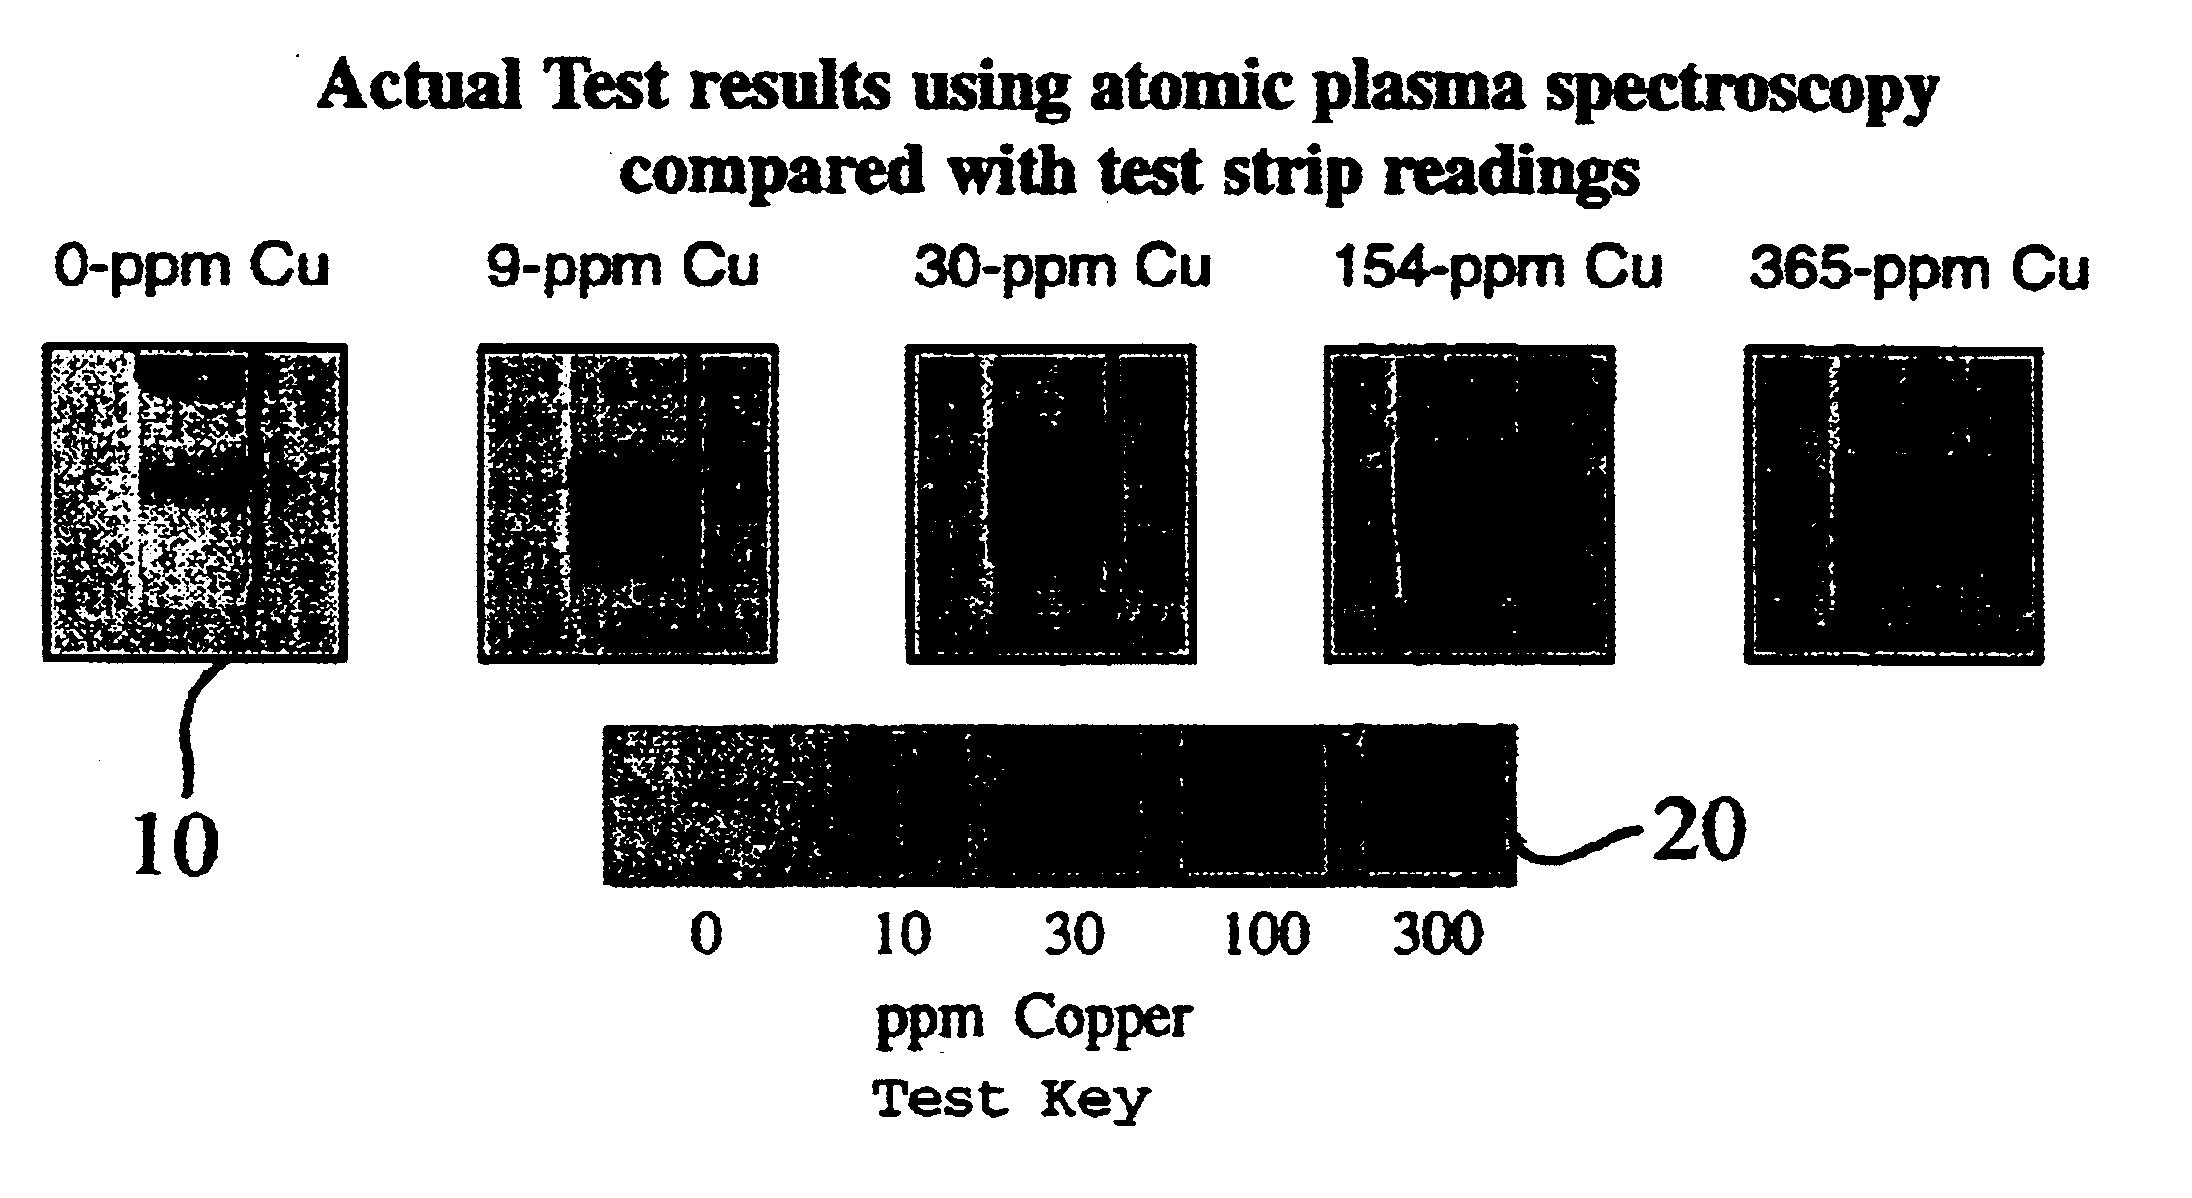 Test for brake fluid age and condition